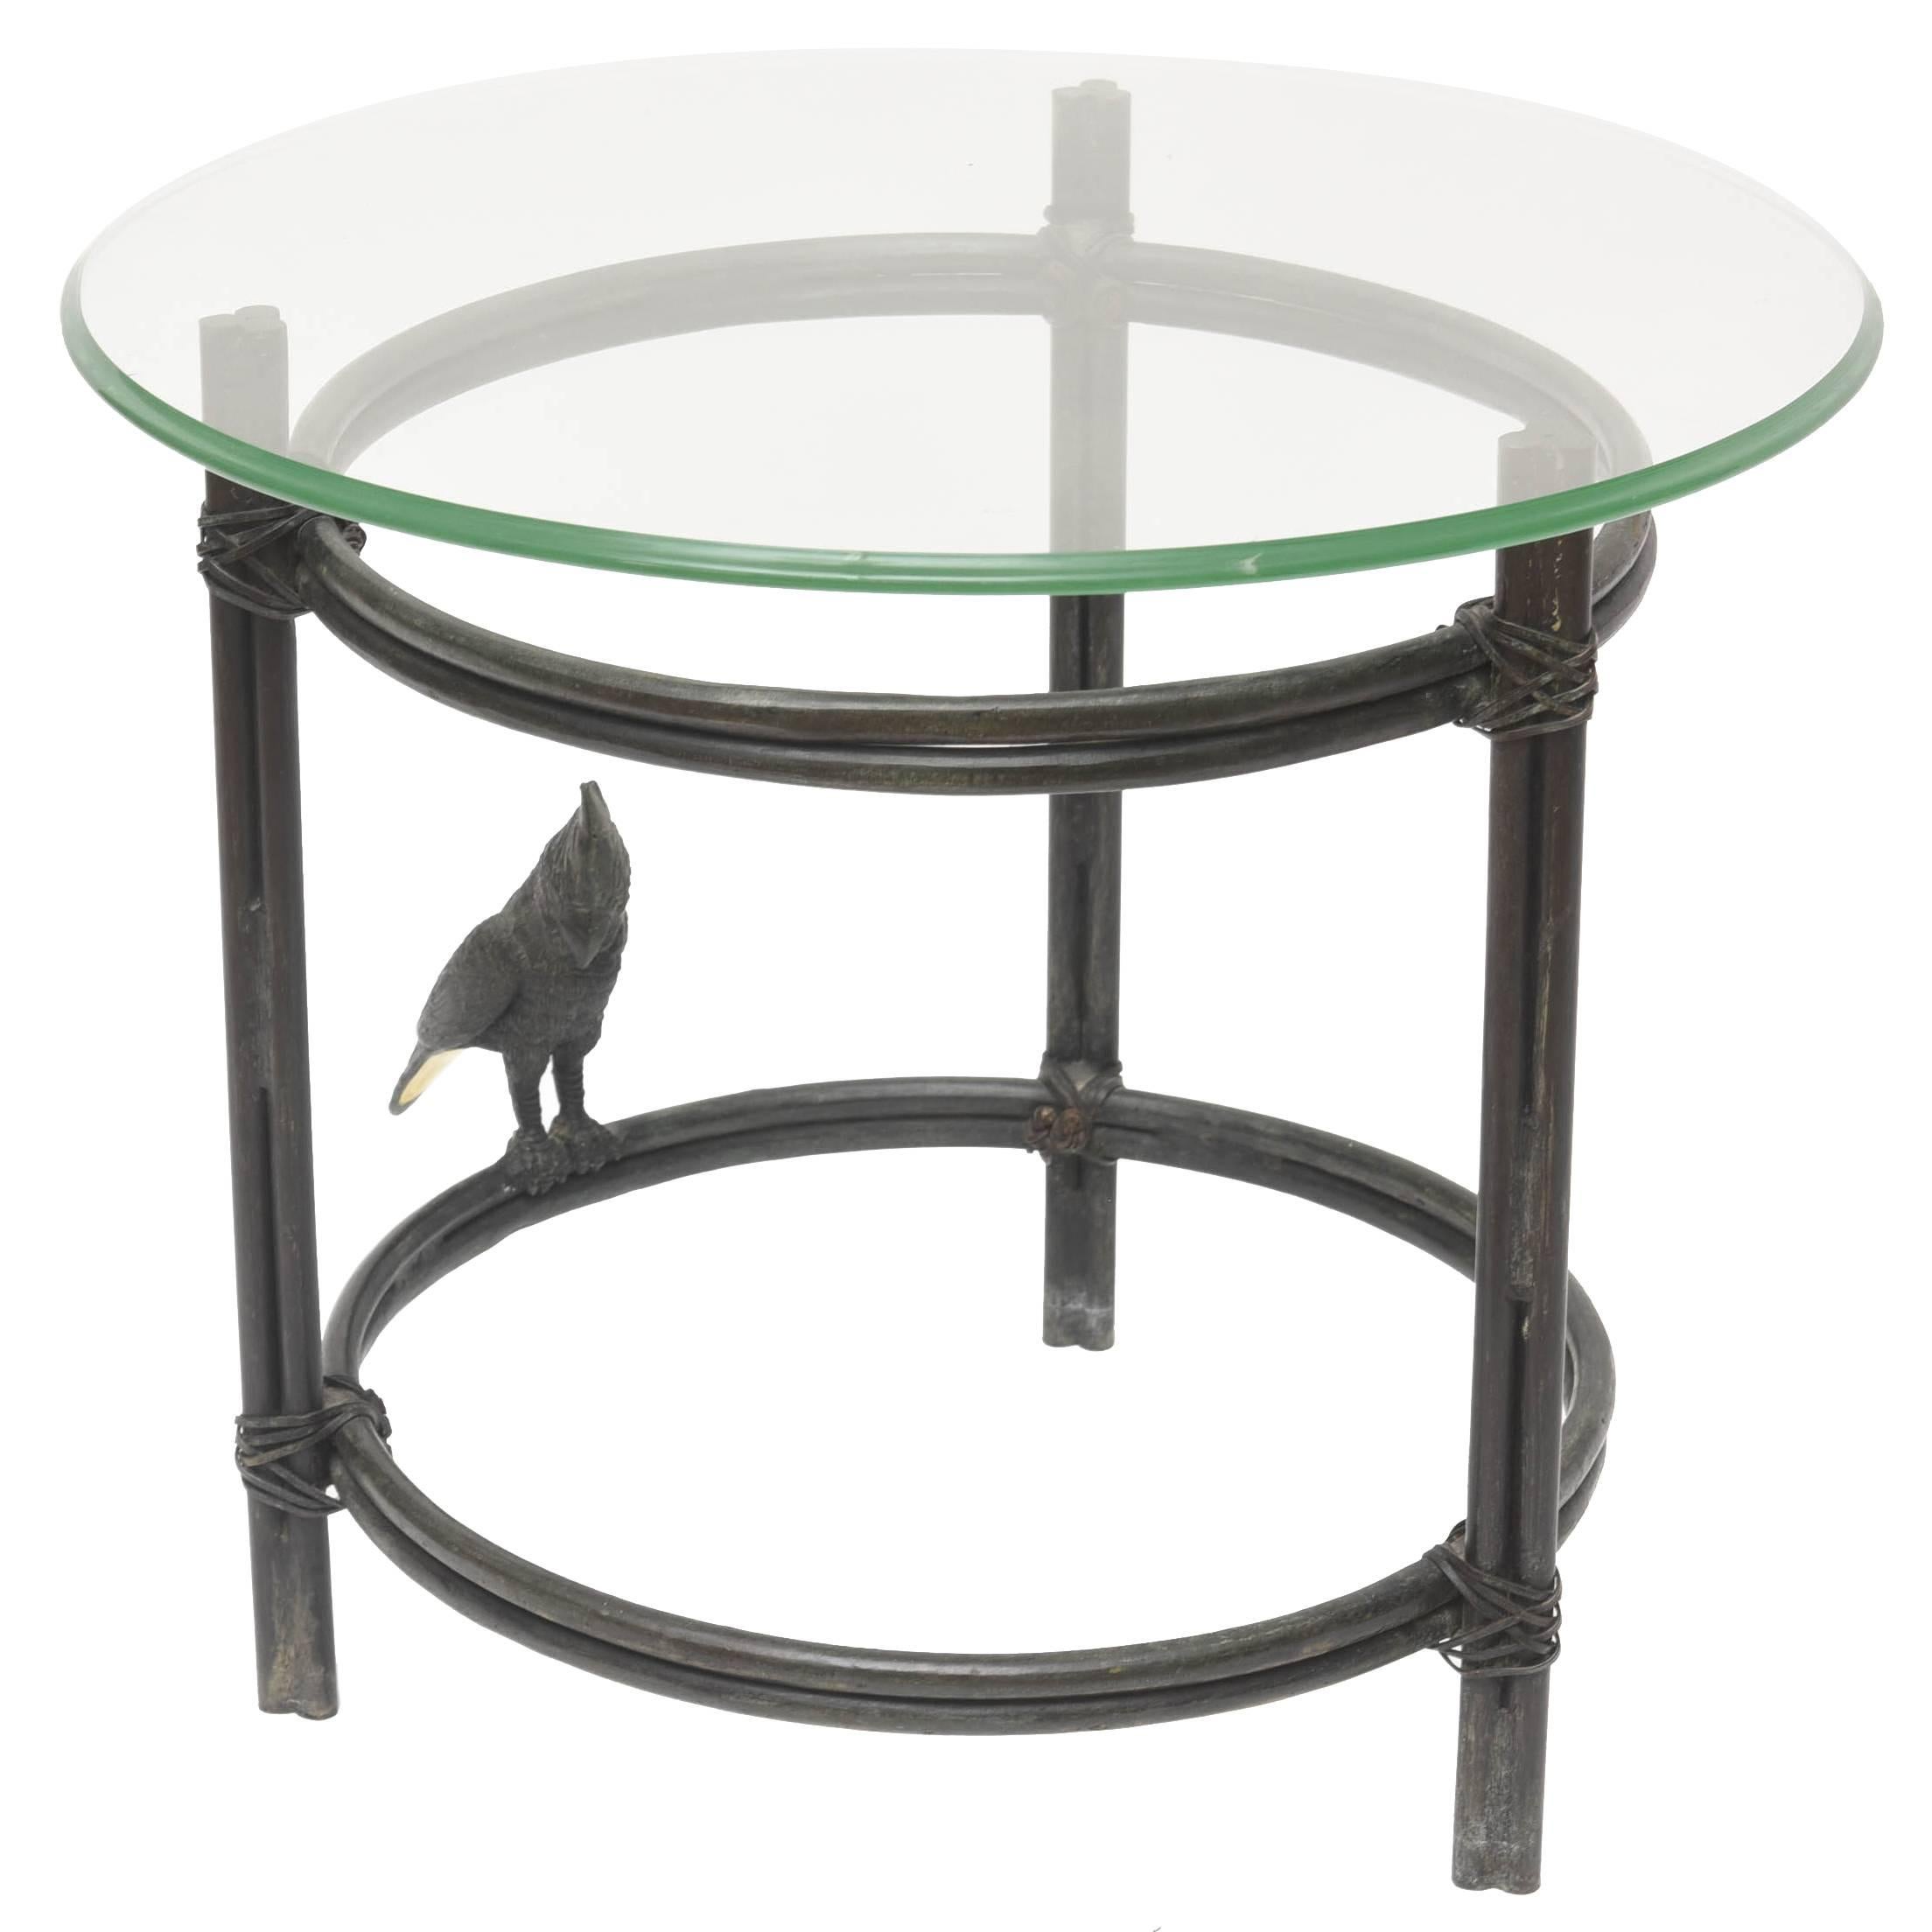 Maitland-Smith Solid Bronze Round Side Table with Parrot Style Diego Giacometti